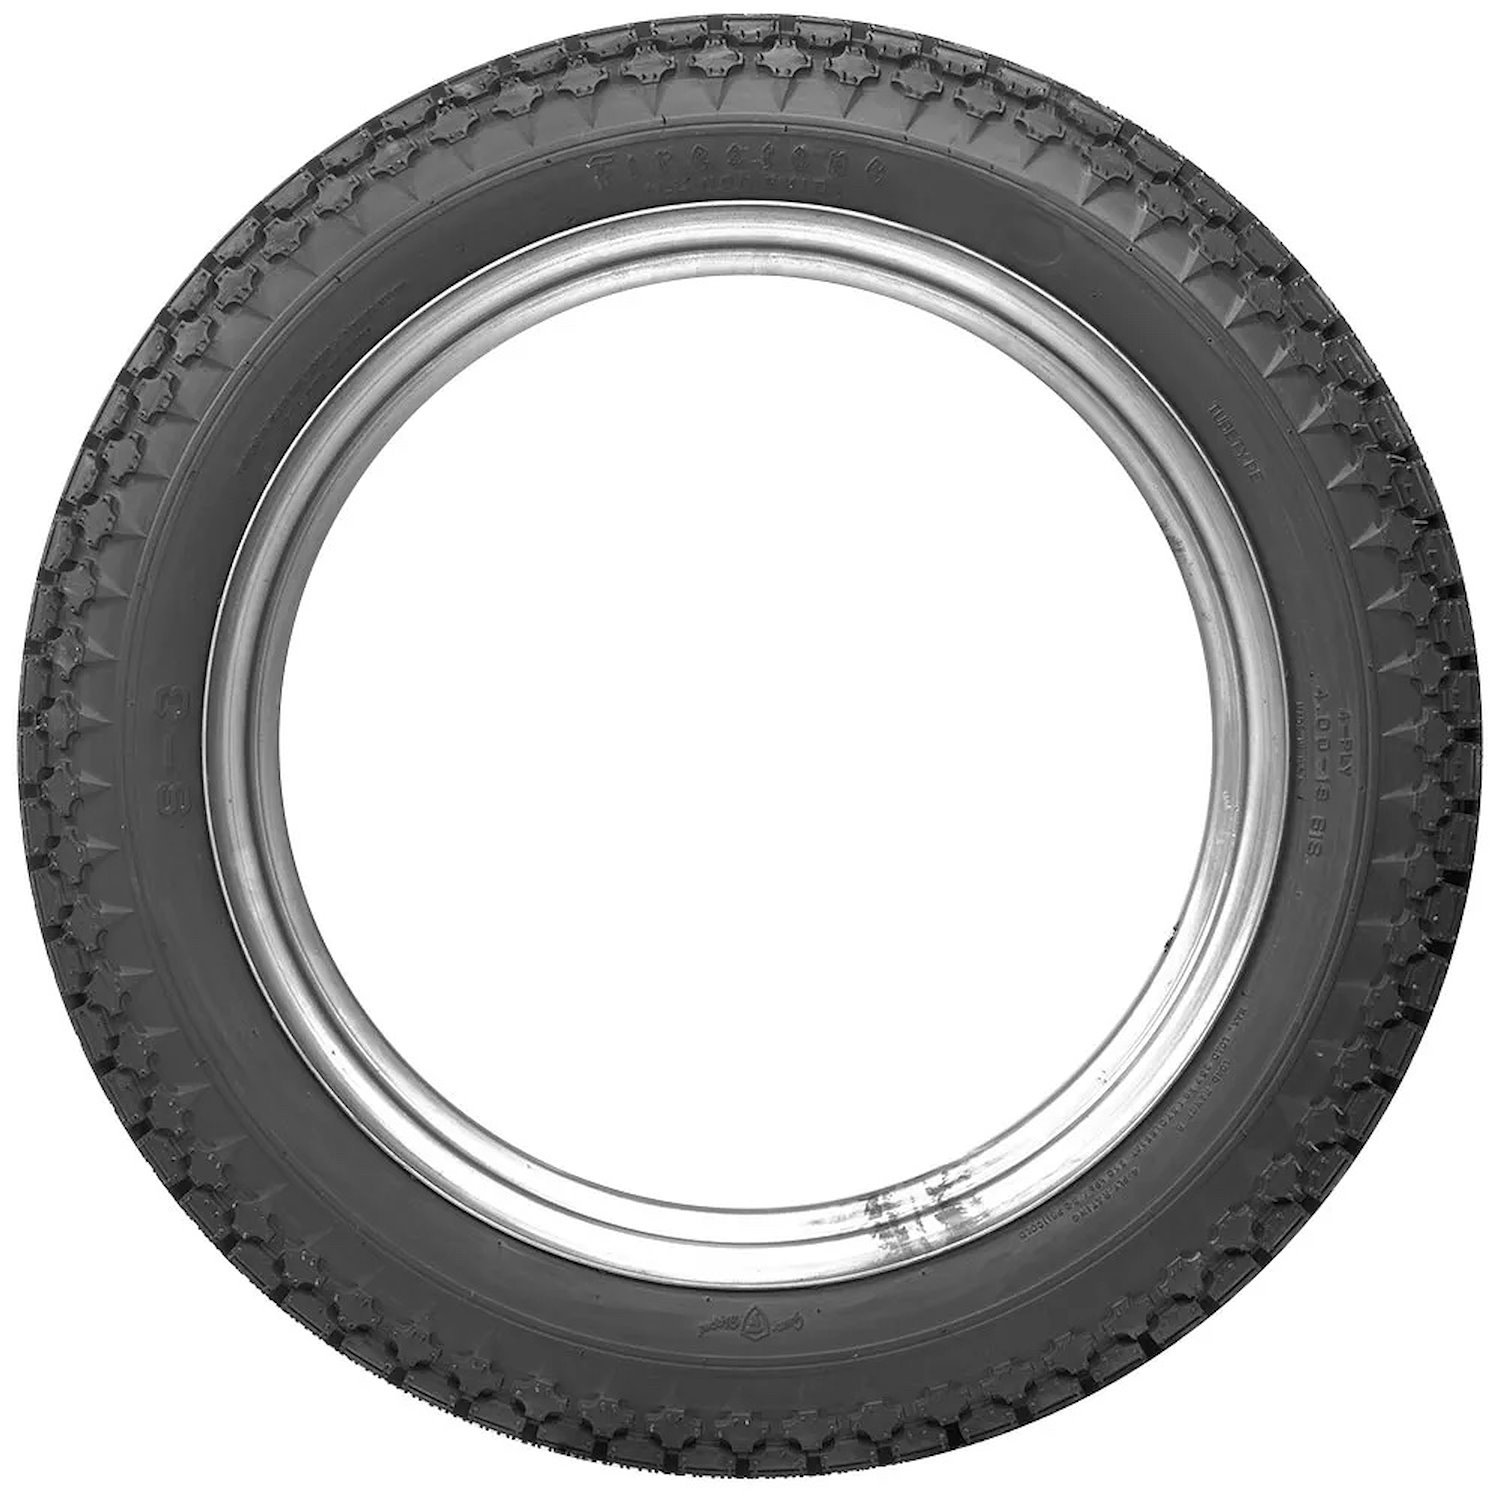 73221 Motorcycle Tire, Firestone Motorcycle ANS, 450-17